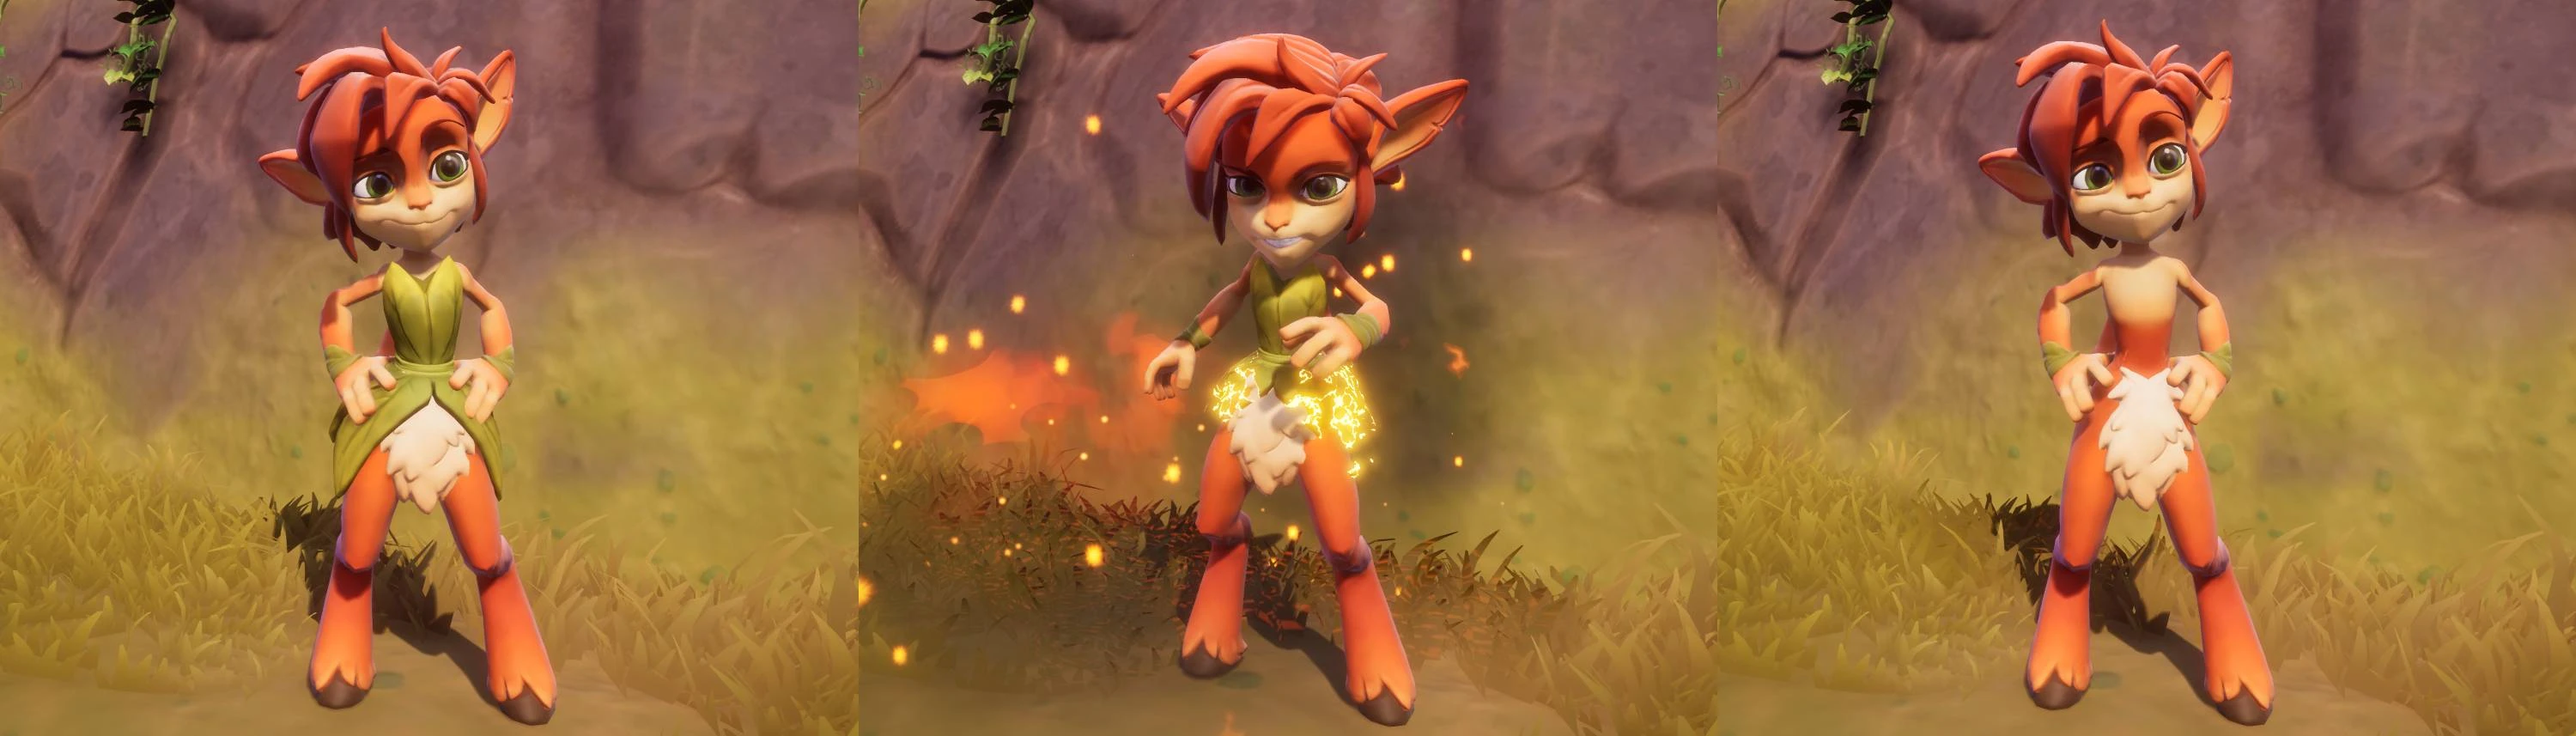 Flammable Elora at Spyro Reignited Trilogy Nexus - Mods and community